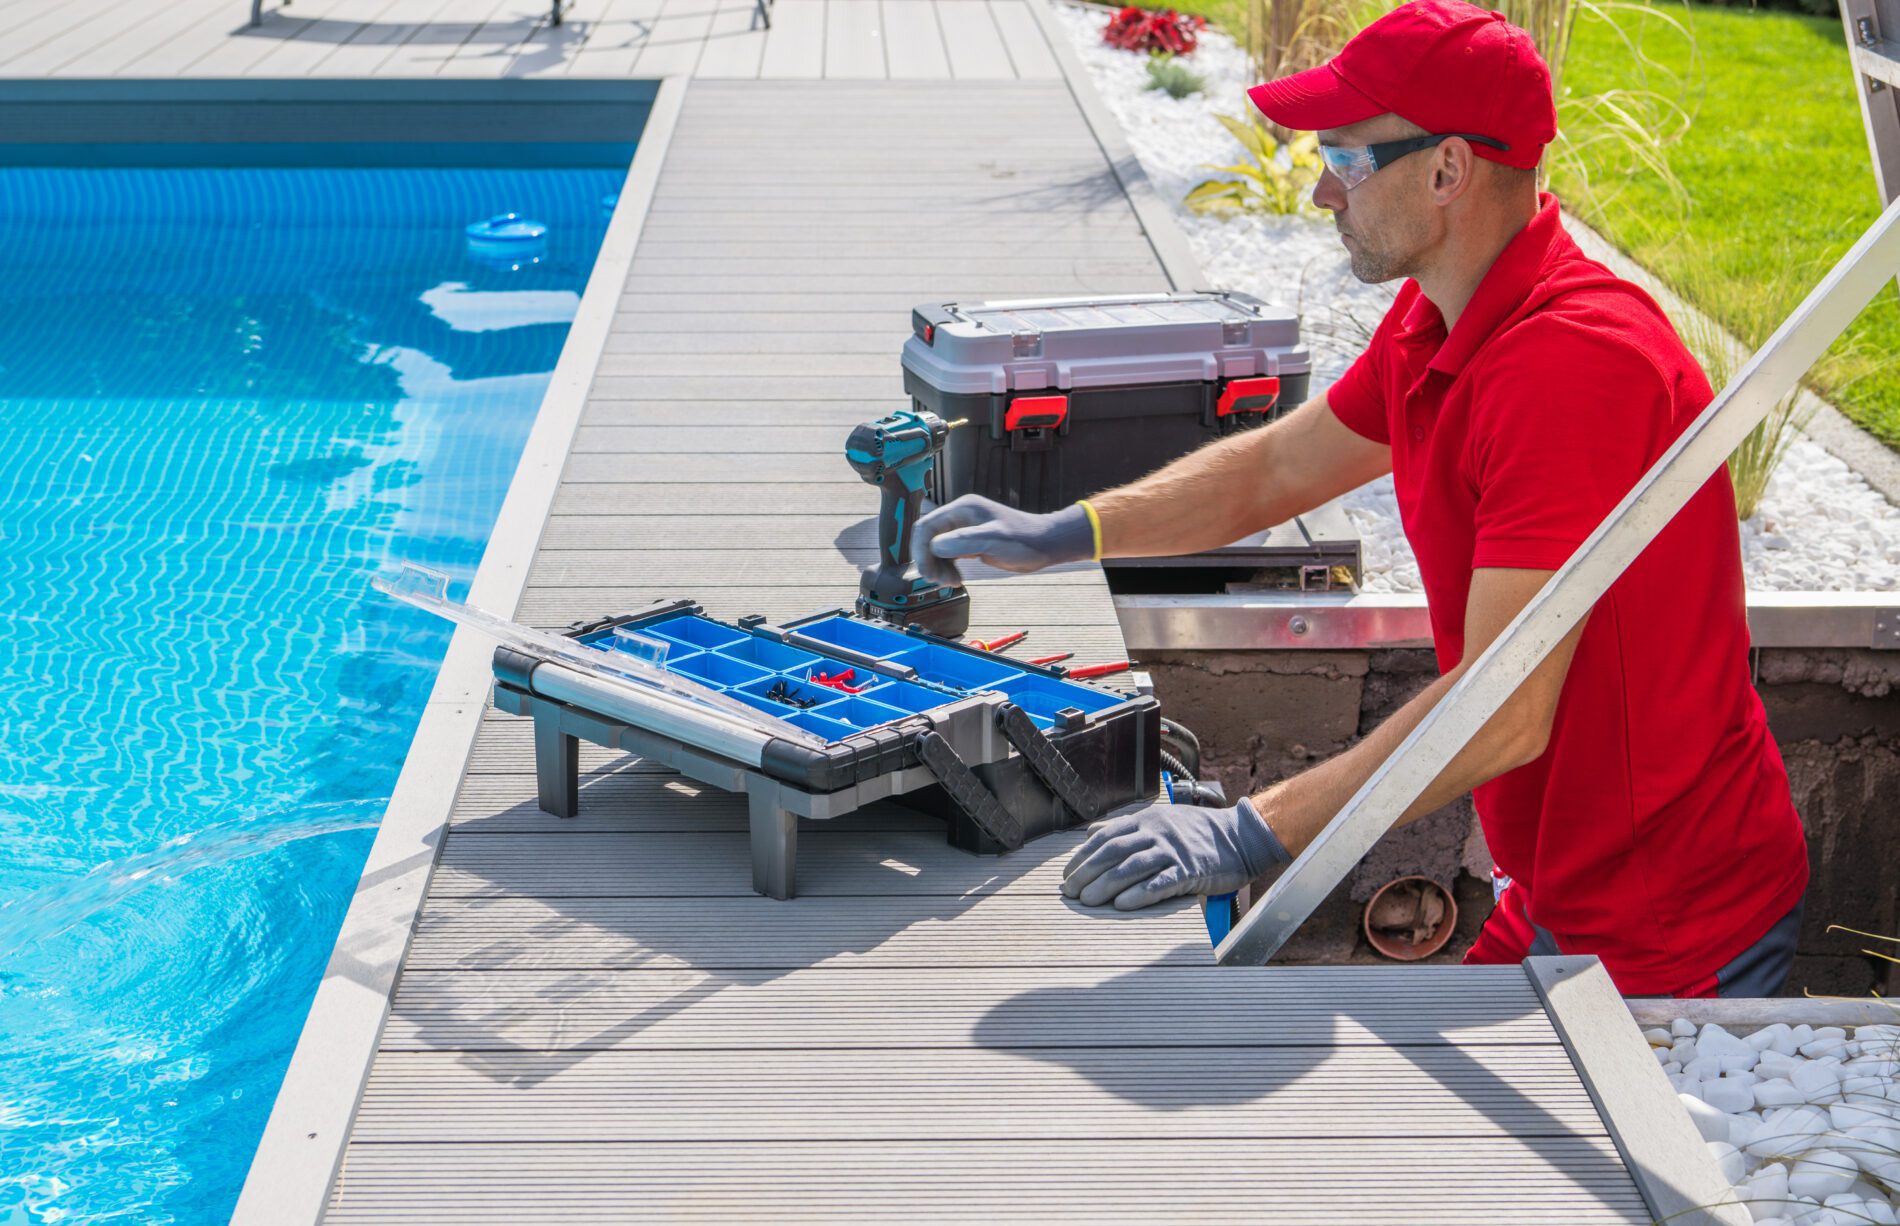 No.1 Pro Pool Filter Cleaning Service - RMD Pool Service